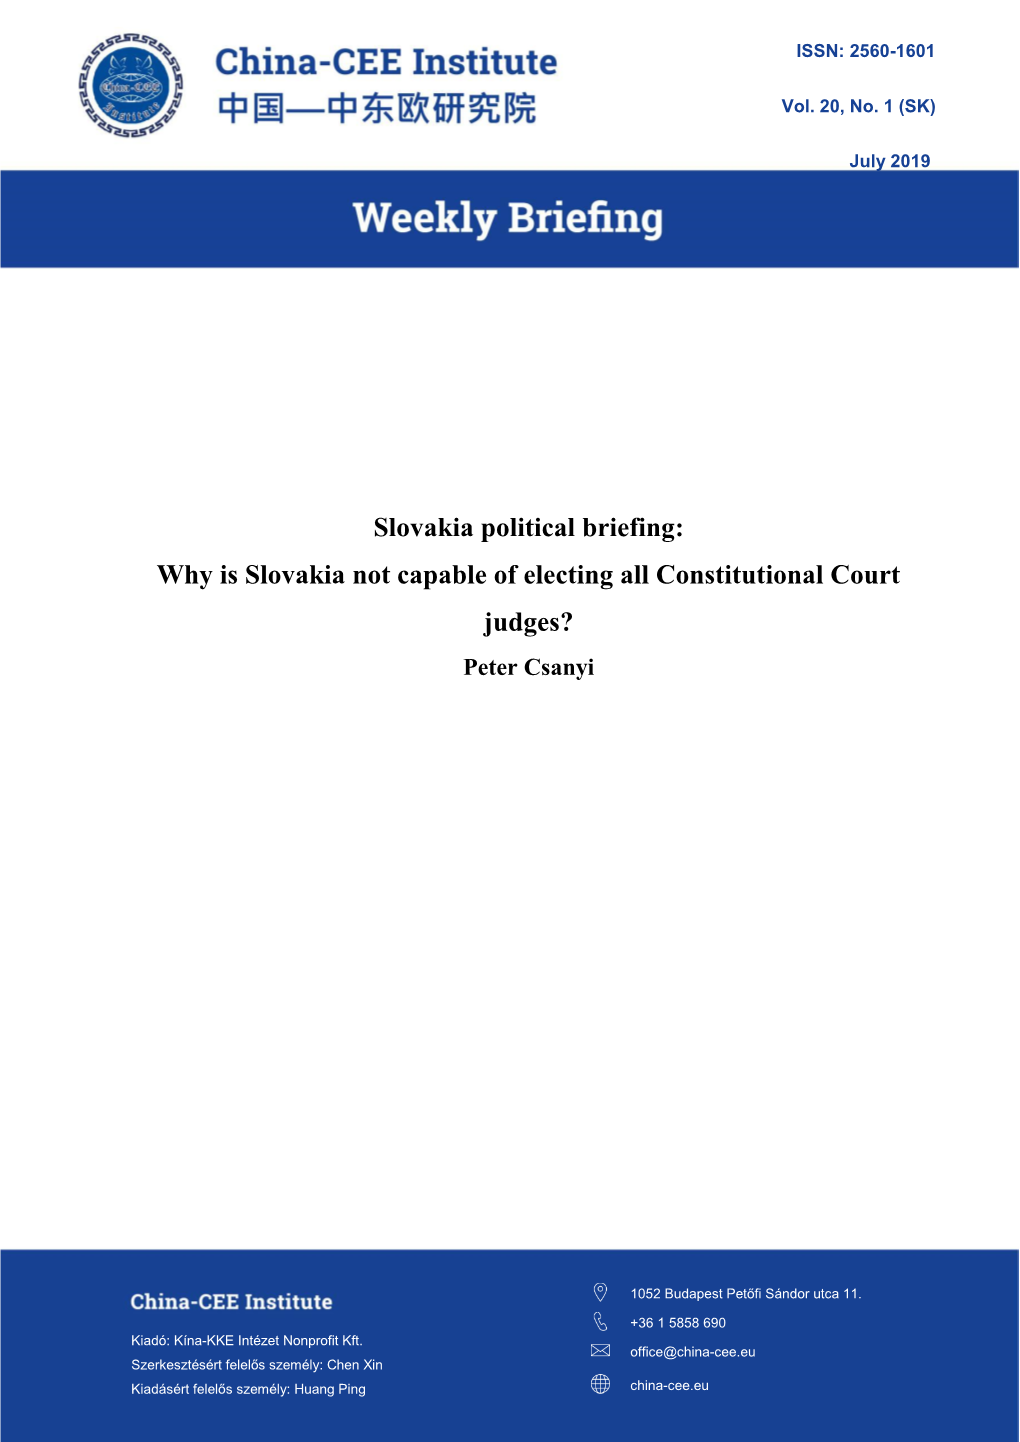 Why Is Slovakia Not Capable of Electing All Constitutional Court Judges? Peter Csanyi